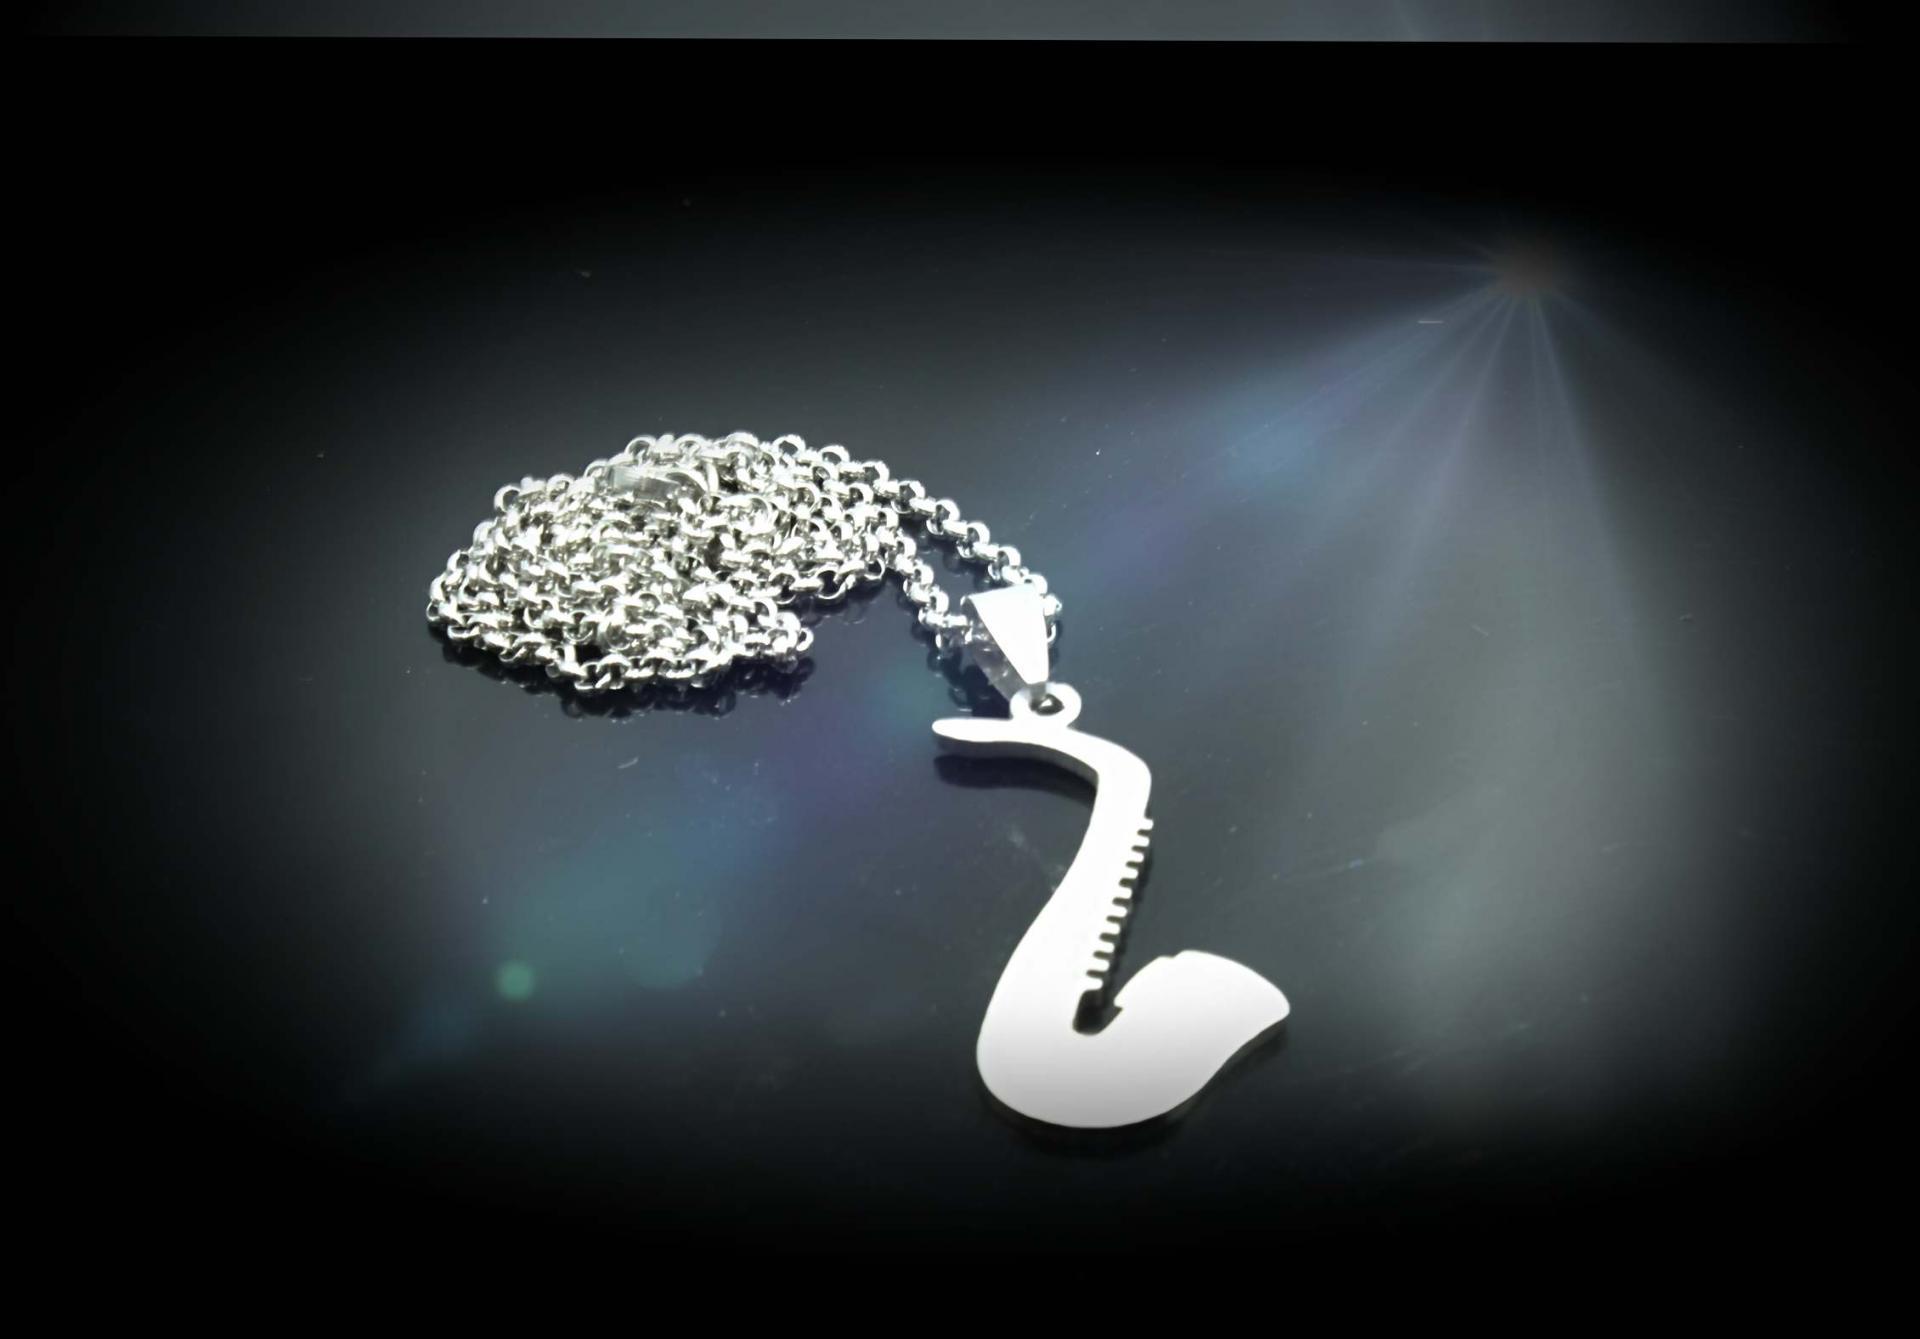 Saxophone Necklace Stainless Steel